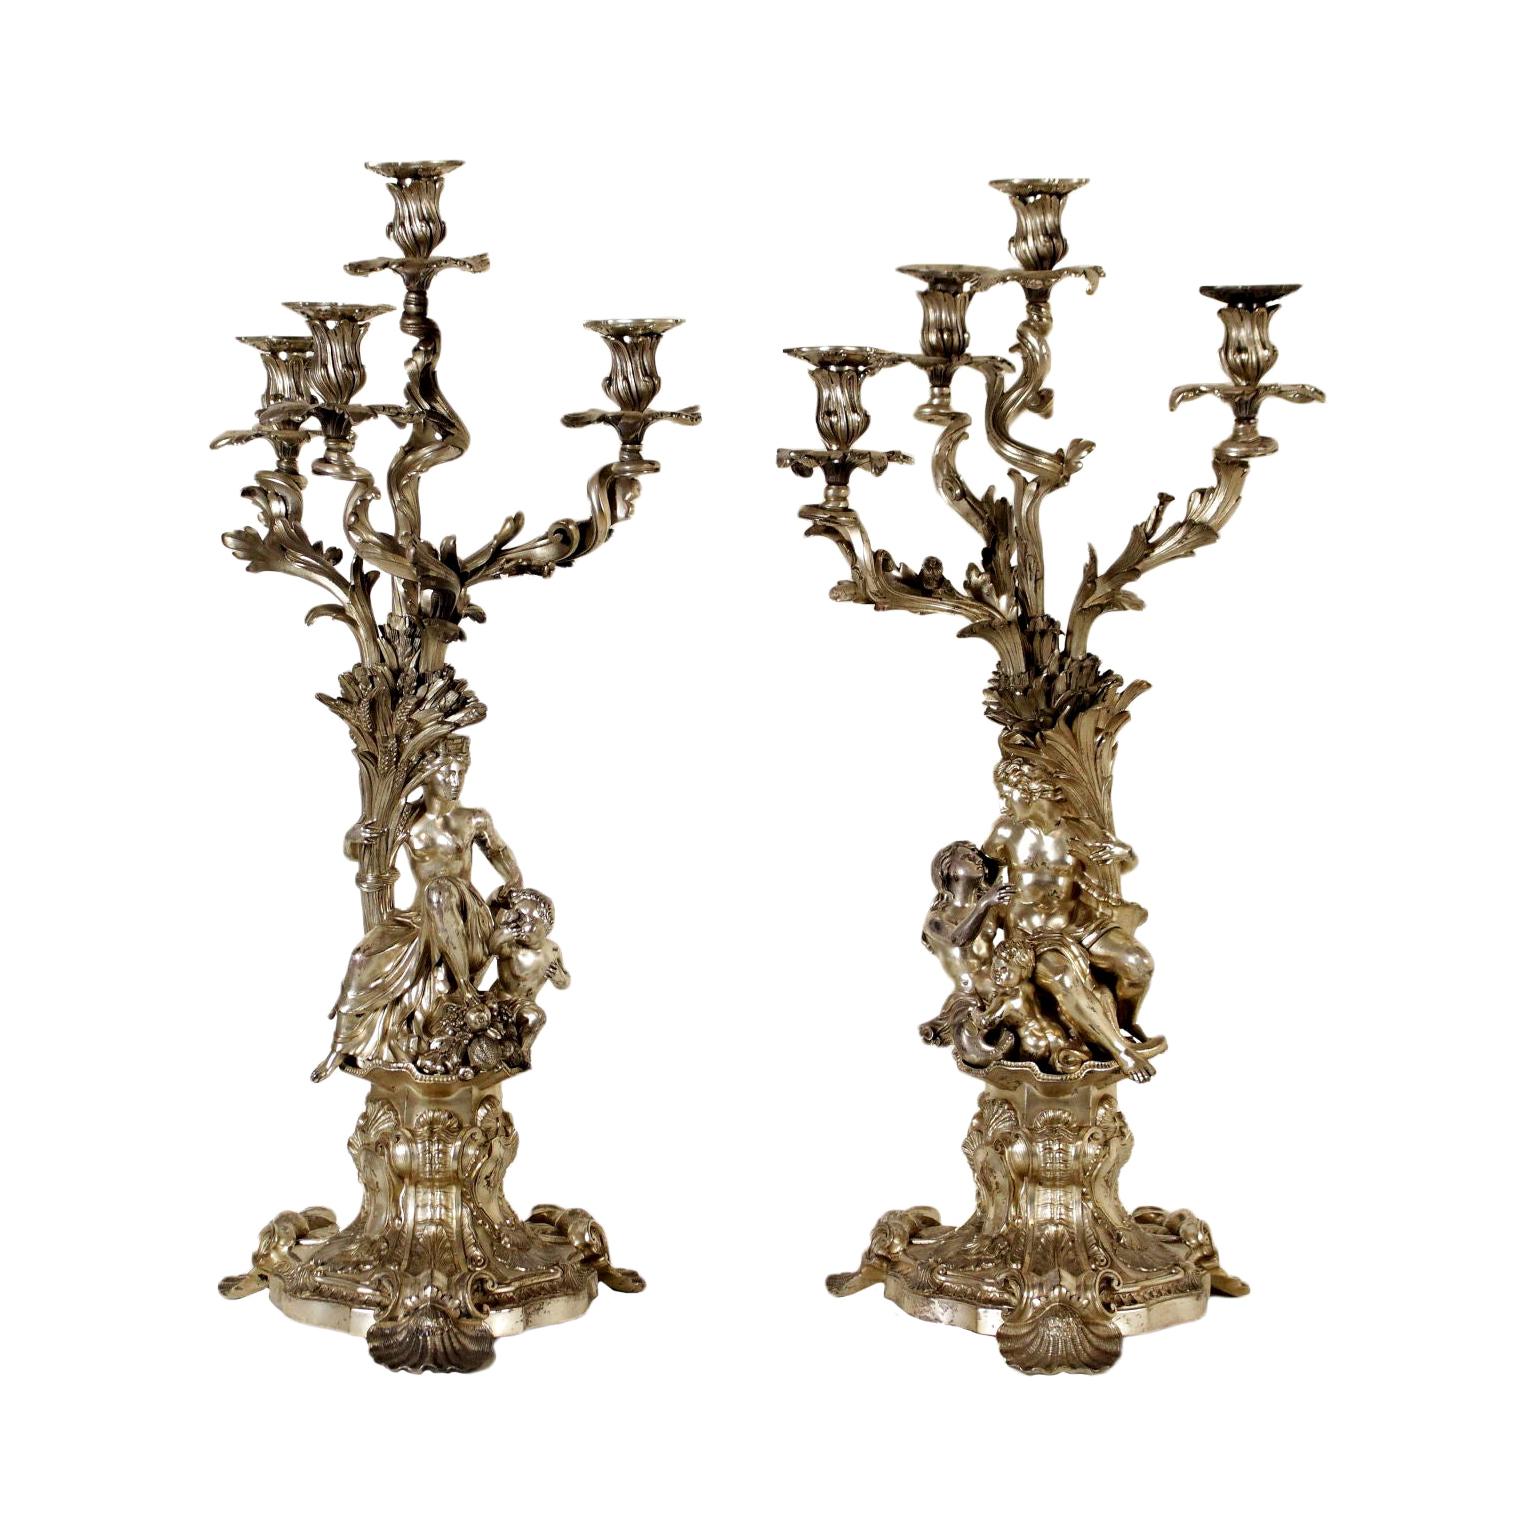 Pair of Silver Plated Bronze Candlesticks, Italy, Late 1800s